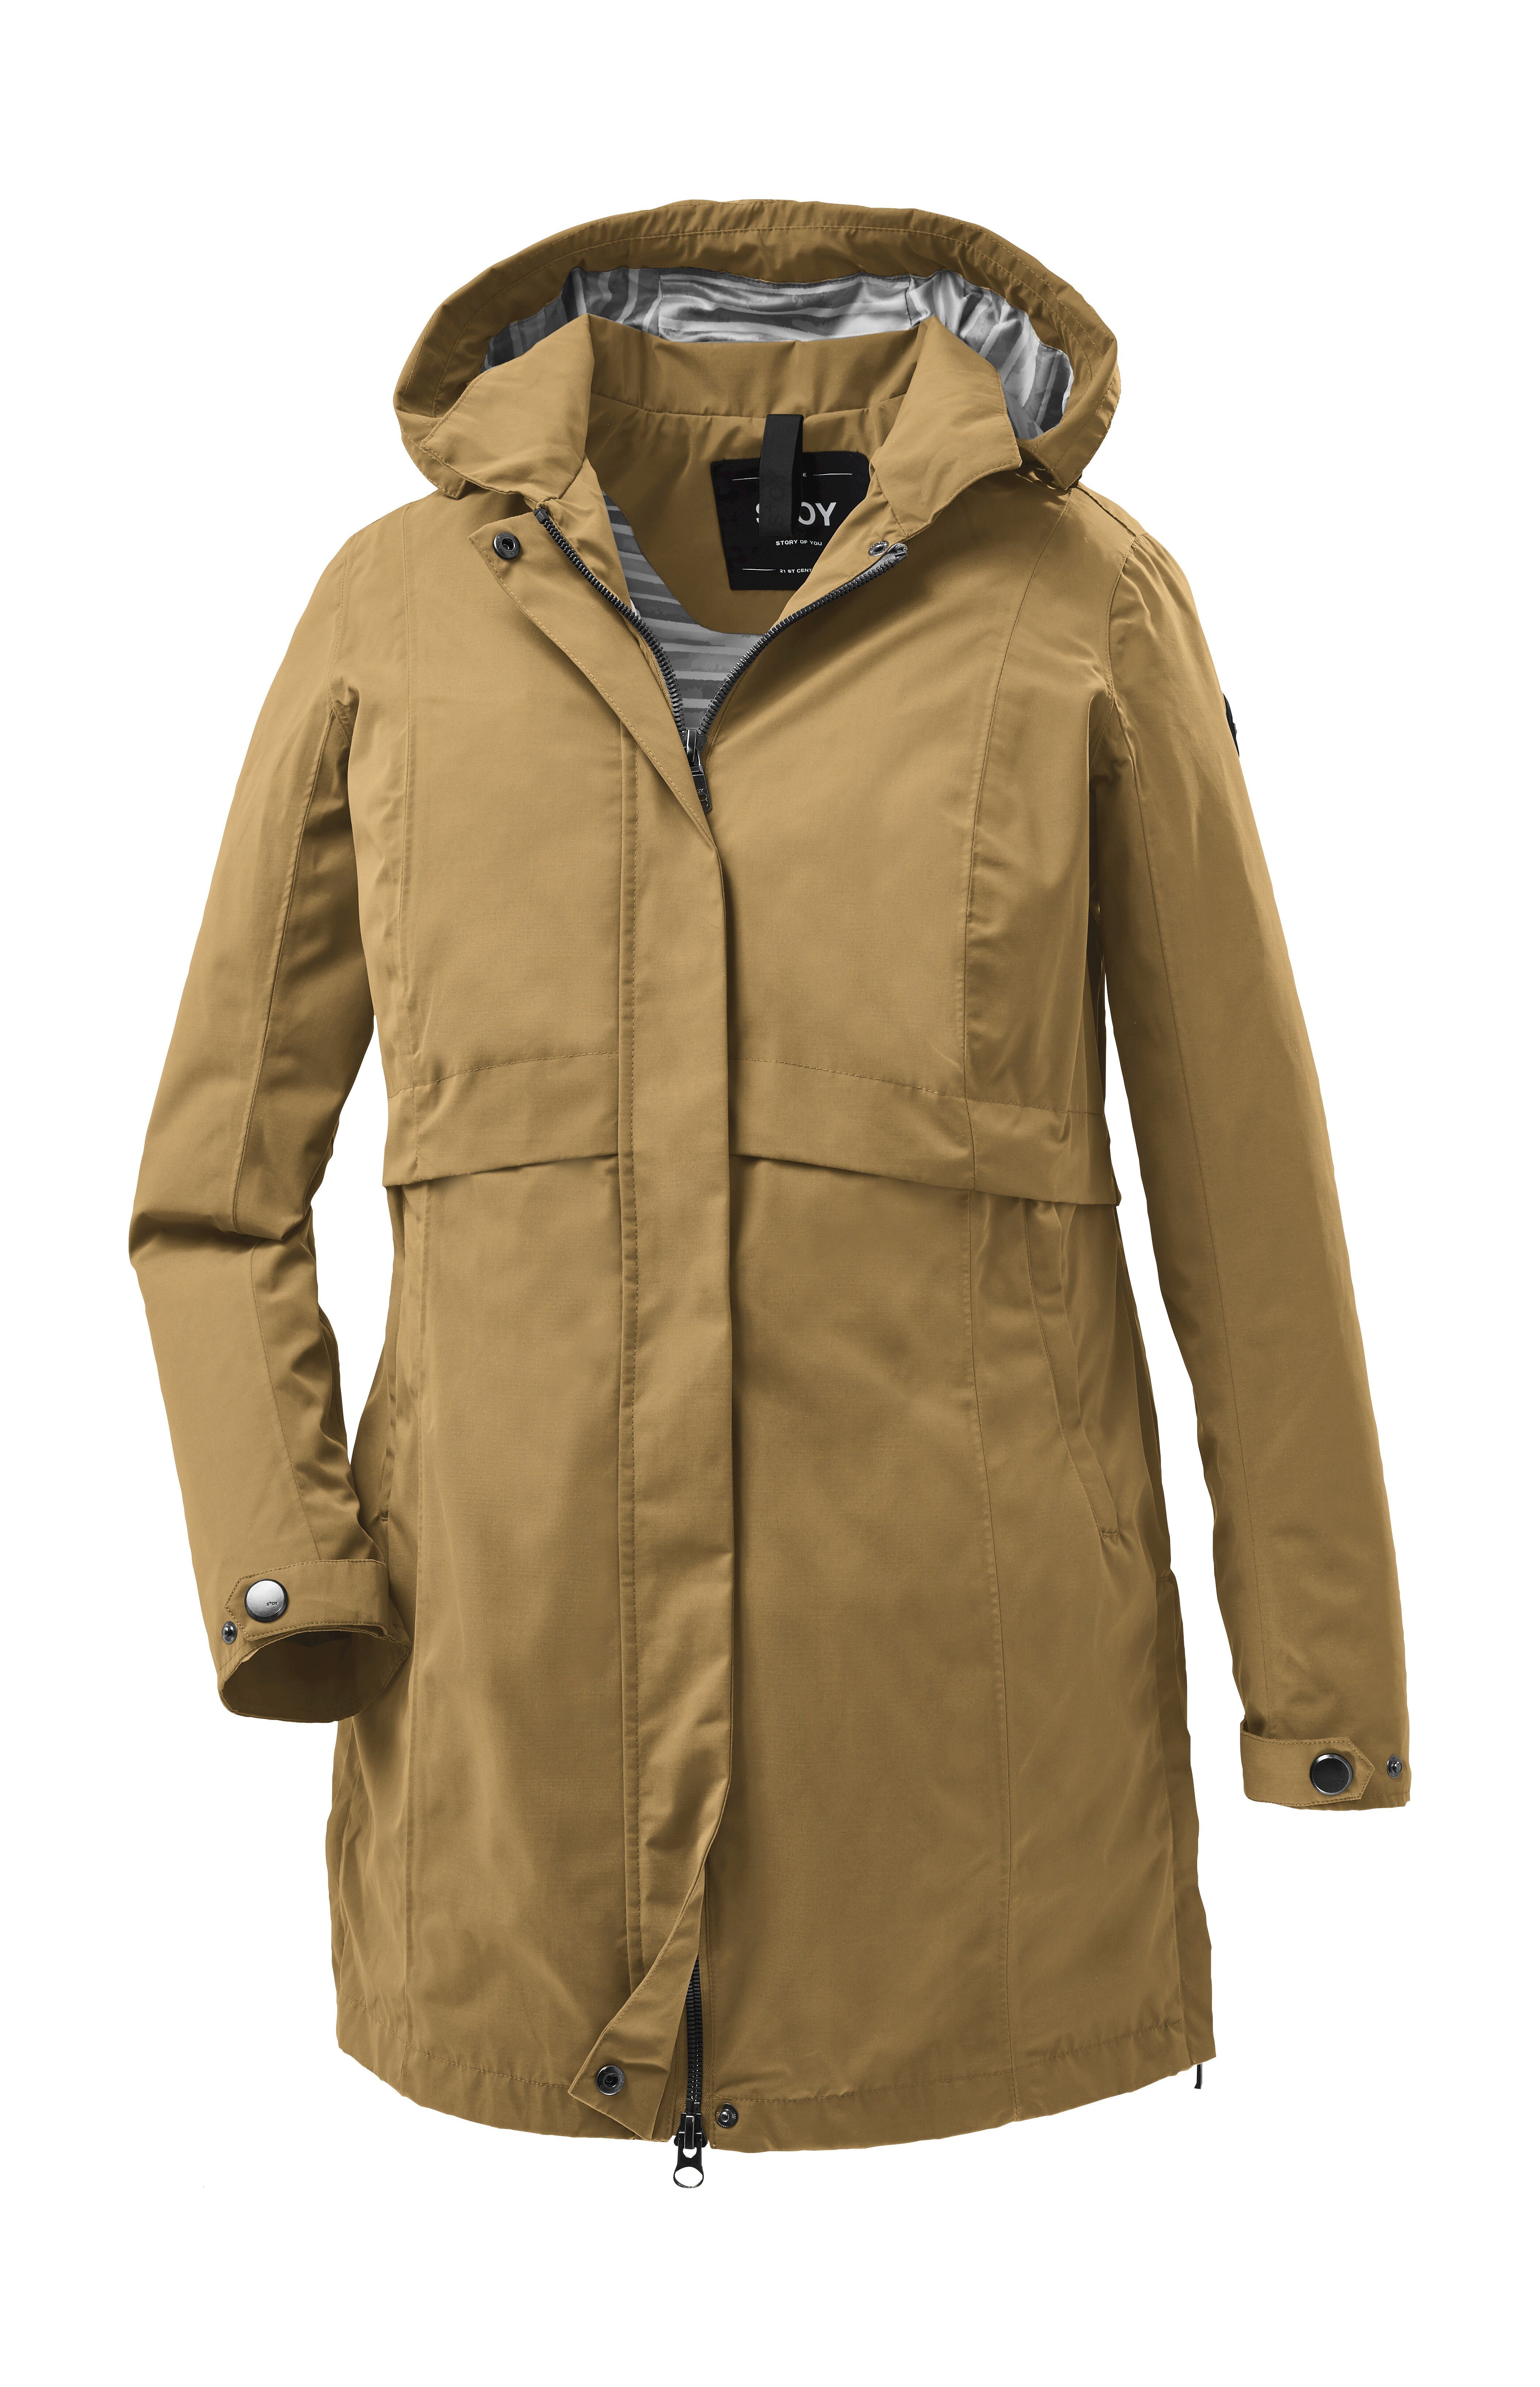 STOY Parka 8 WMN STS PRK